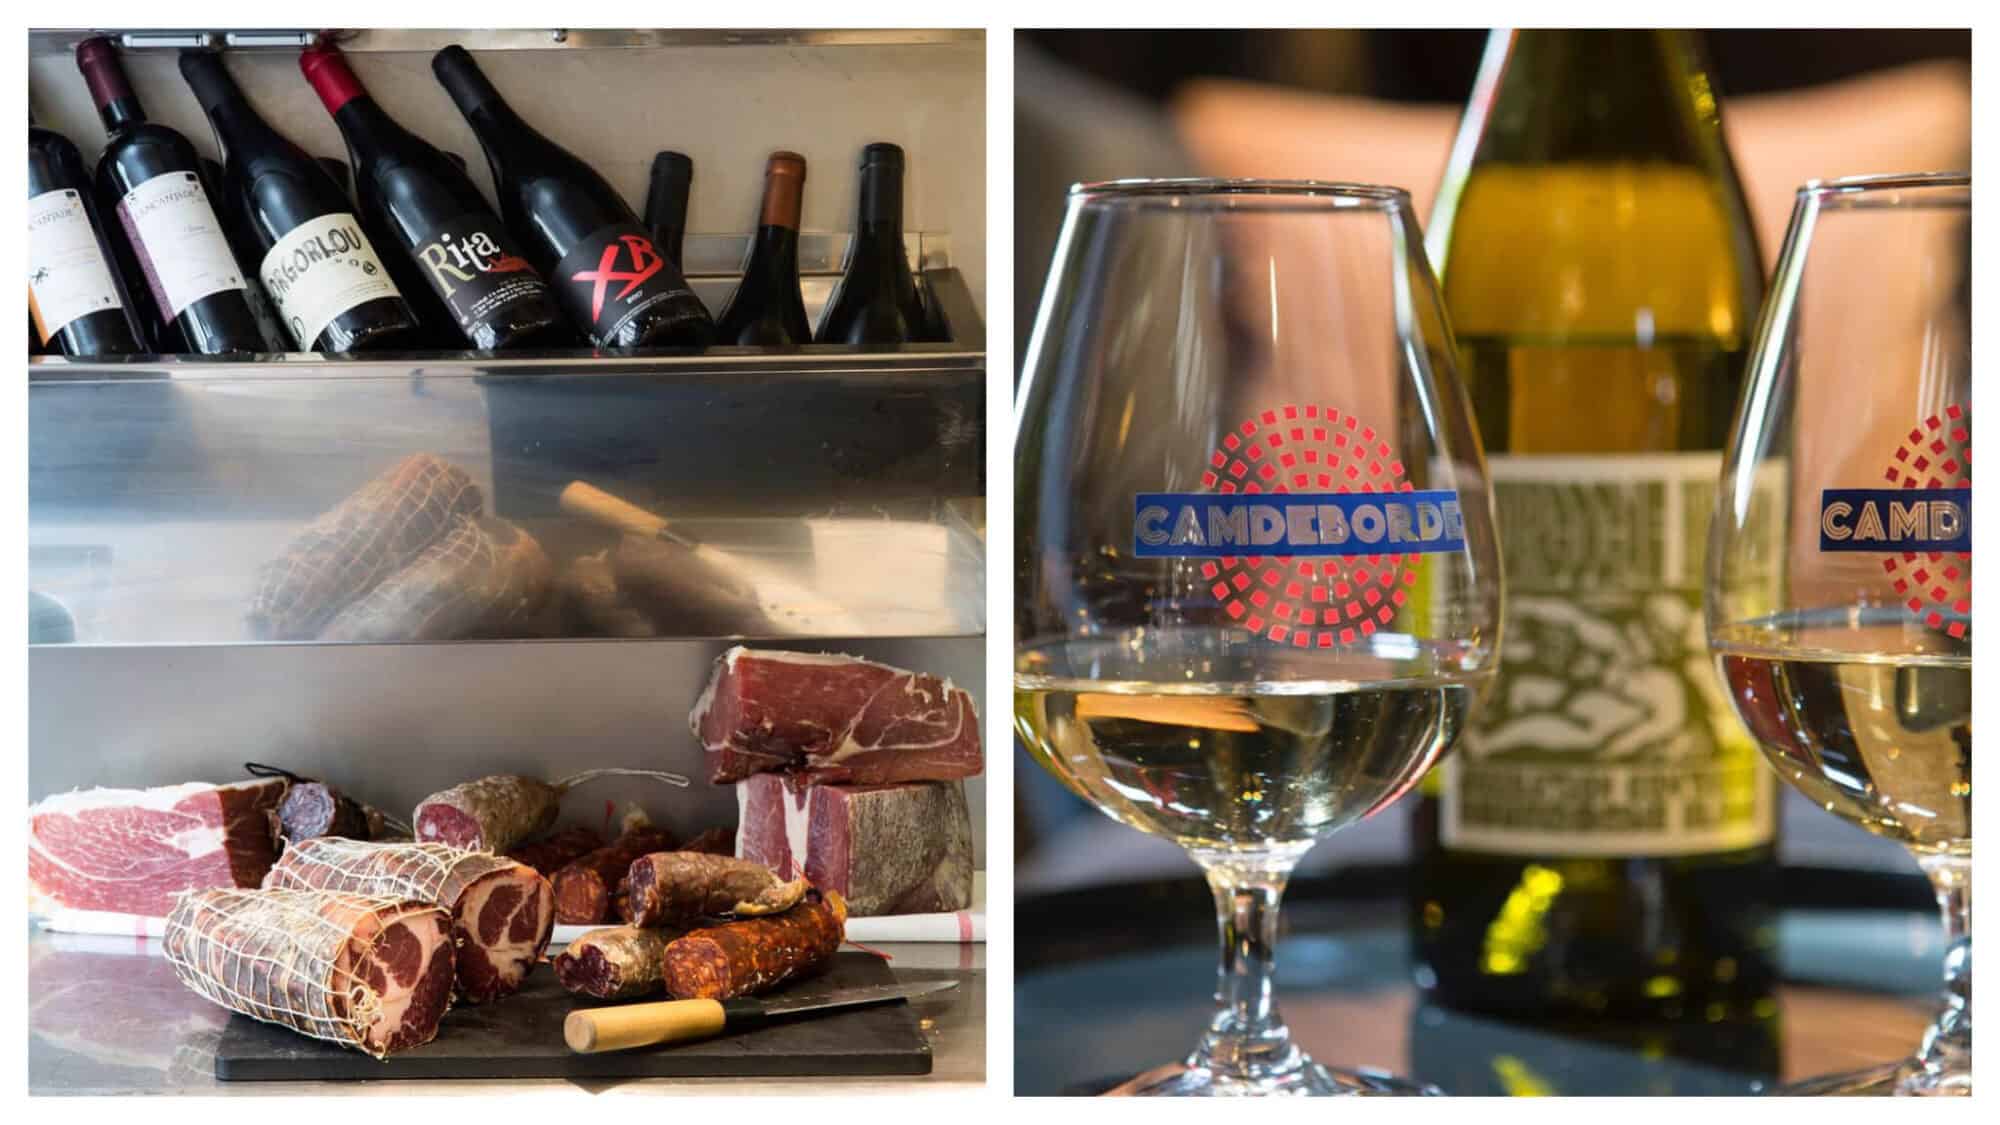 Left: A selection of Spanish charcuterie and 8 bottles of red wine on a metal shelf, at about the table level.
Right: a bottle of wine wine with two glases sat in front of it. 